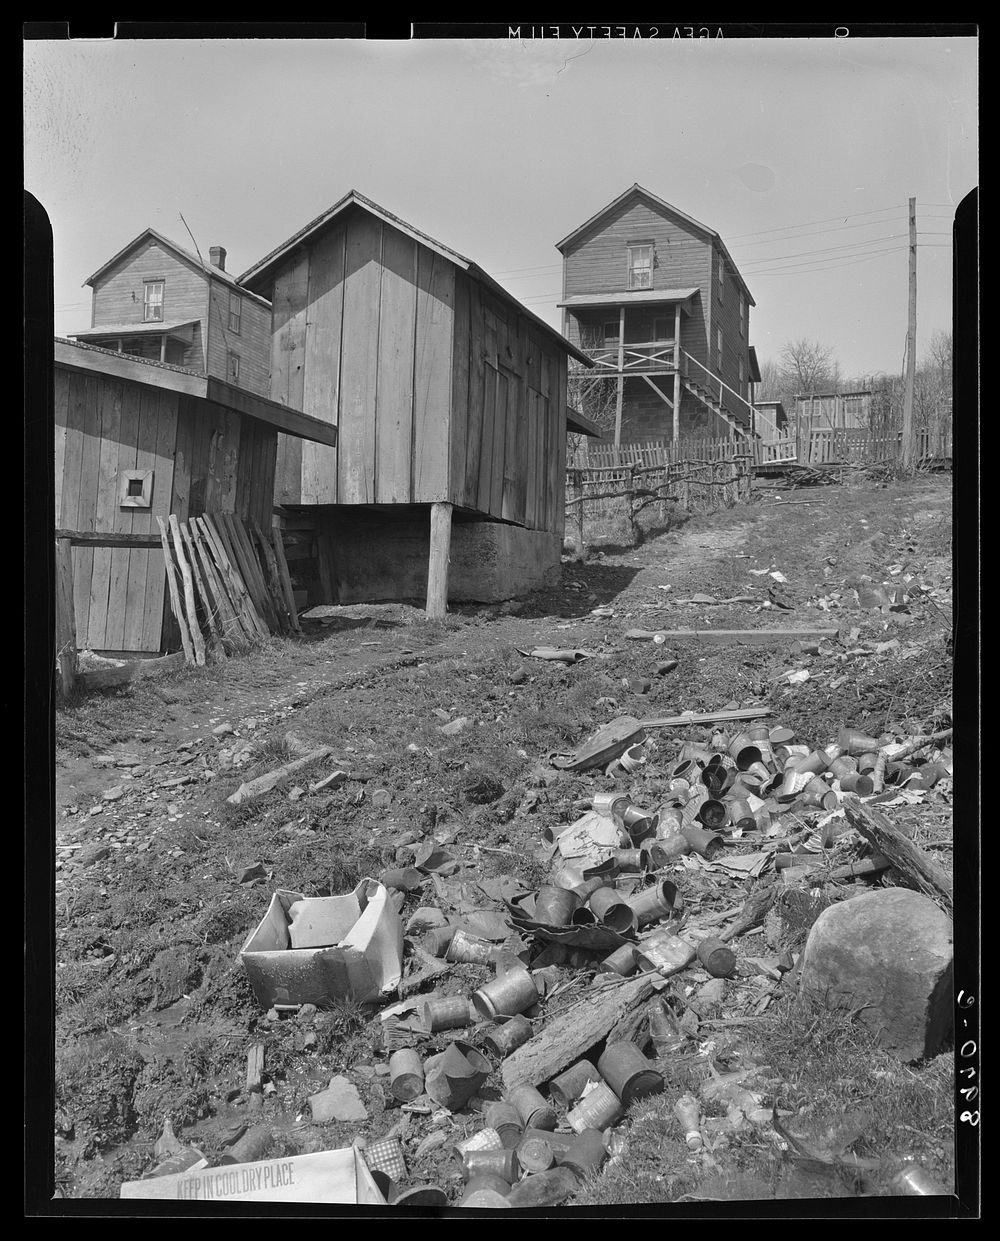 Refuse heap behind company houses. Kempton, West Virginia. Sourced from the Library of Congress.